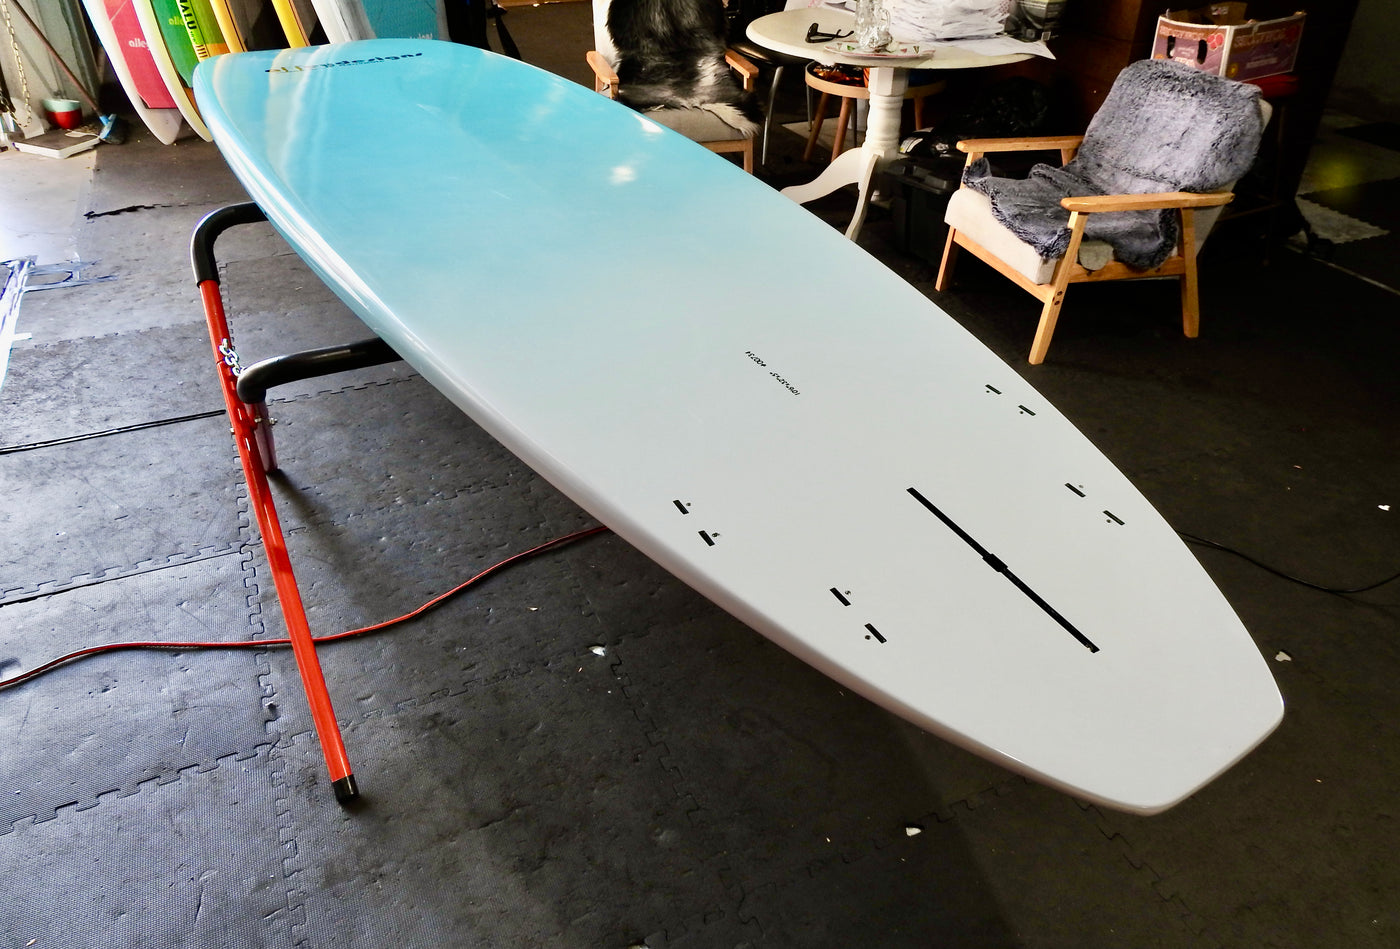 10'6" x 32" Timber & Teal Turtle Classic Alleydesigns SUP 11KG - Alleydesigns  Pty Ltd                                             ABN: 44165571264